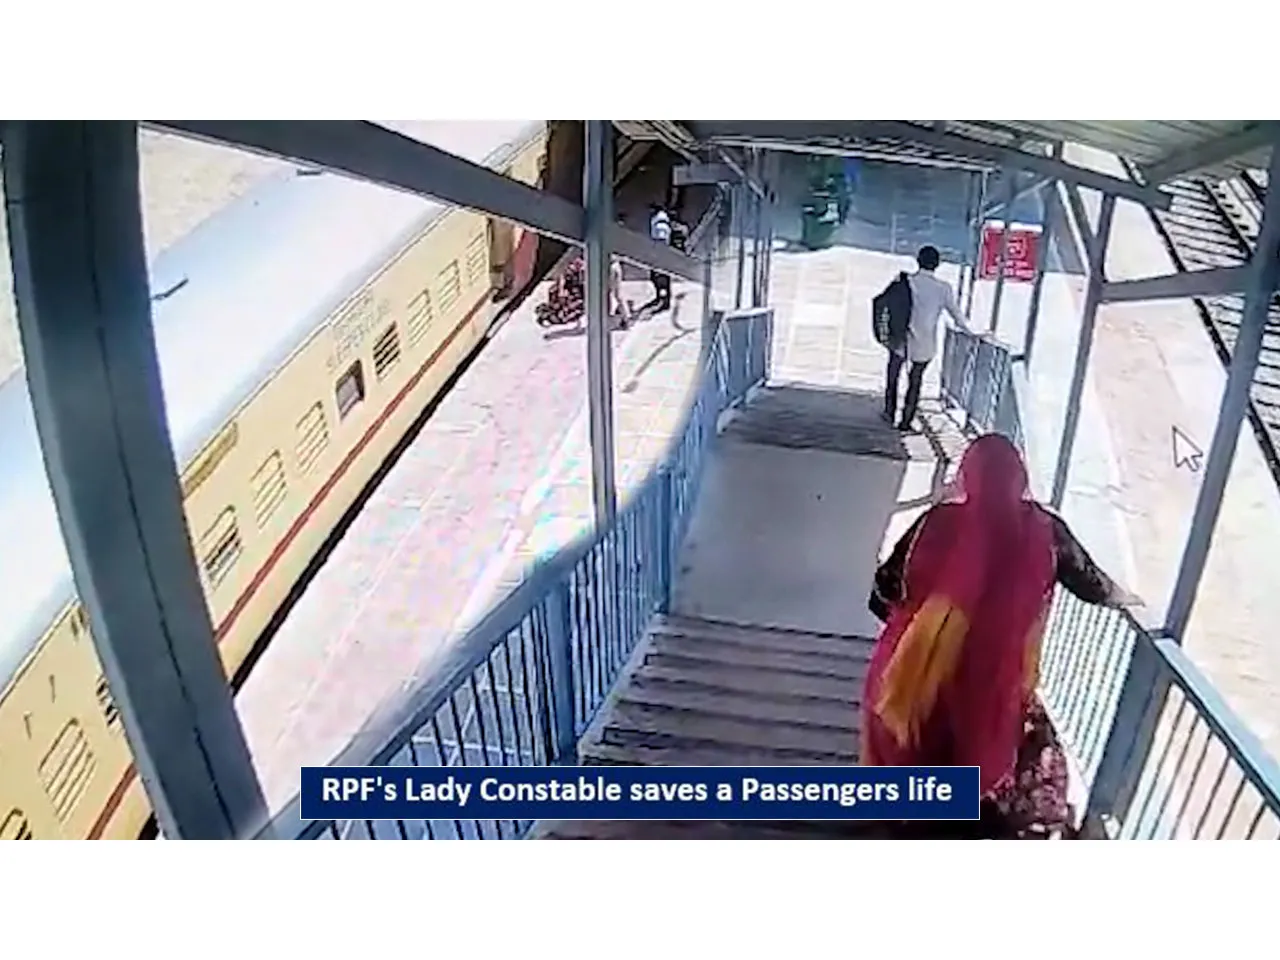 RPF's Lady Constable saves a passengers life